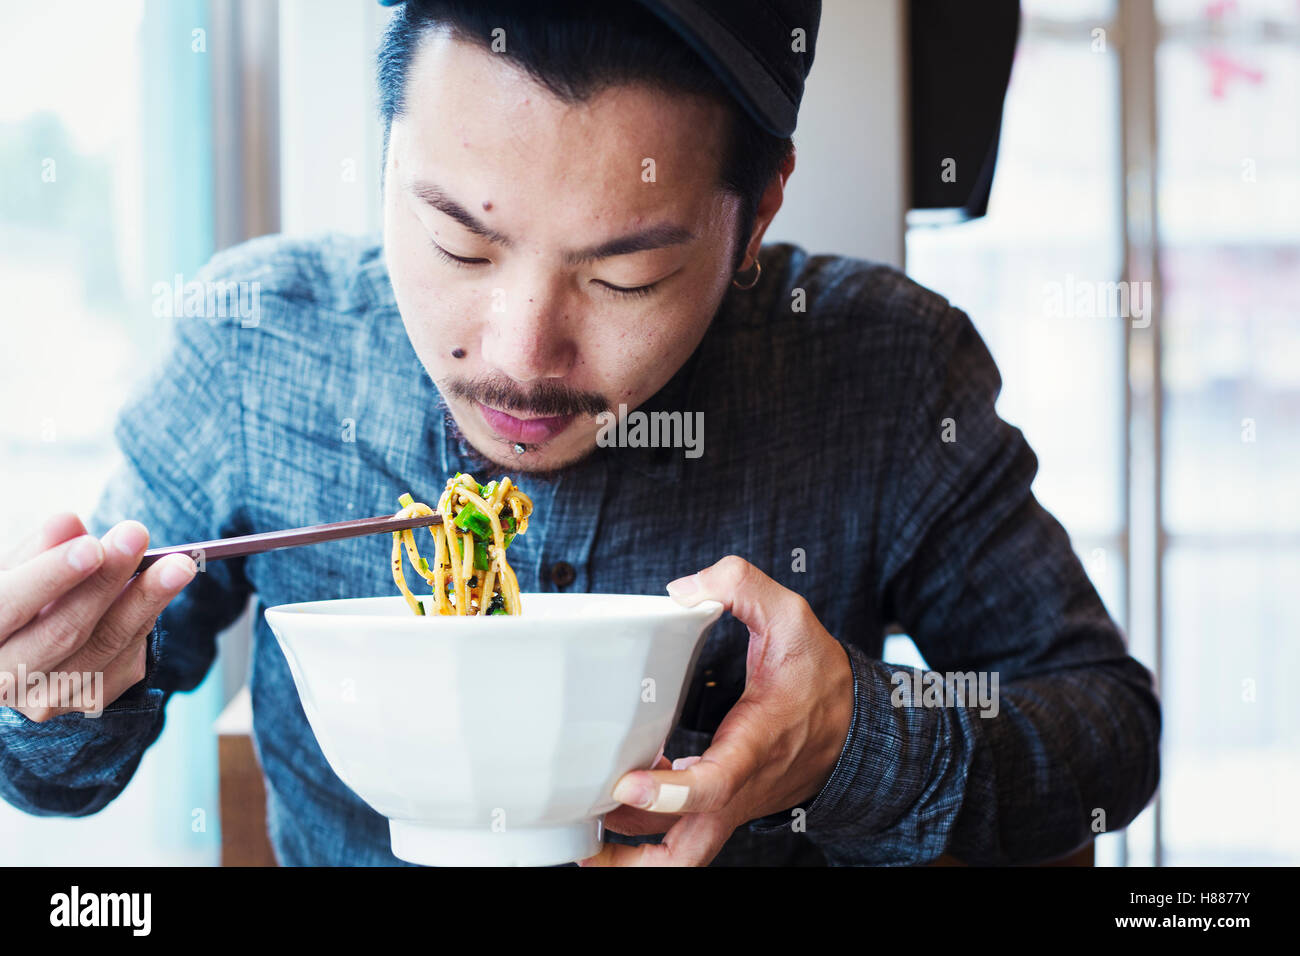 A ramen noodle cafe in a city.  A man seated eating ramen noodles from a large broth bowl. Stock Photo